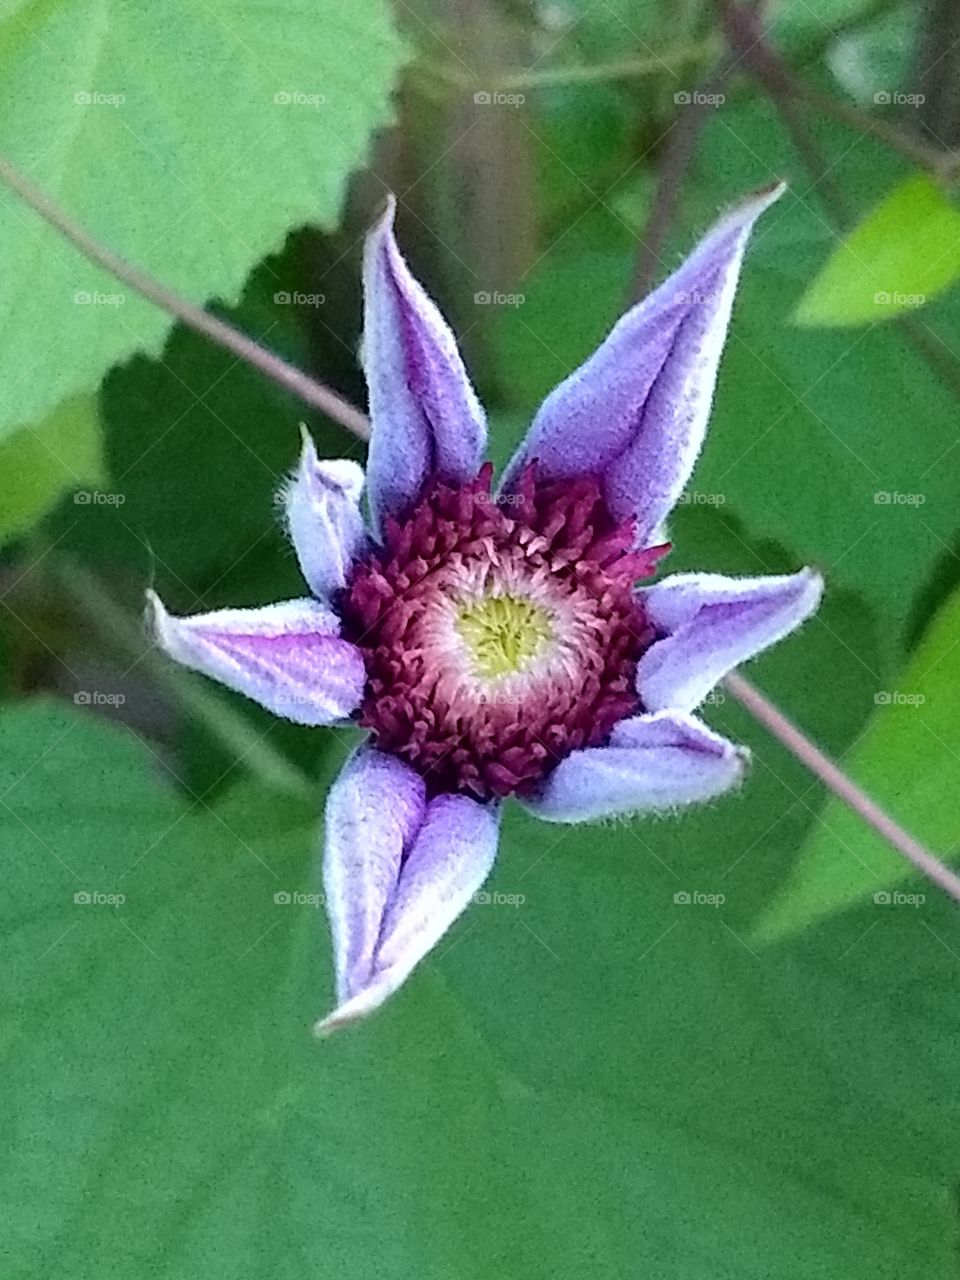 Clematis bloom opening up